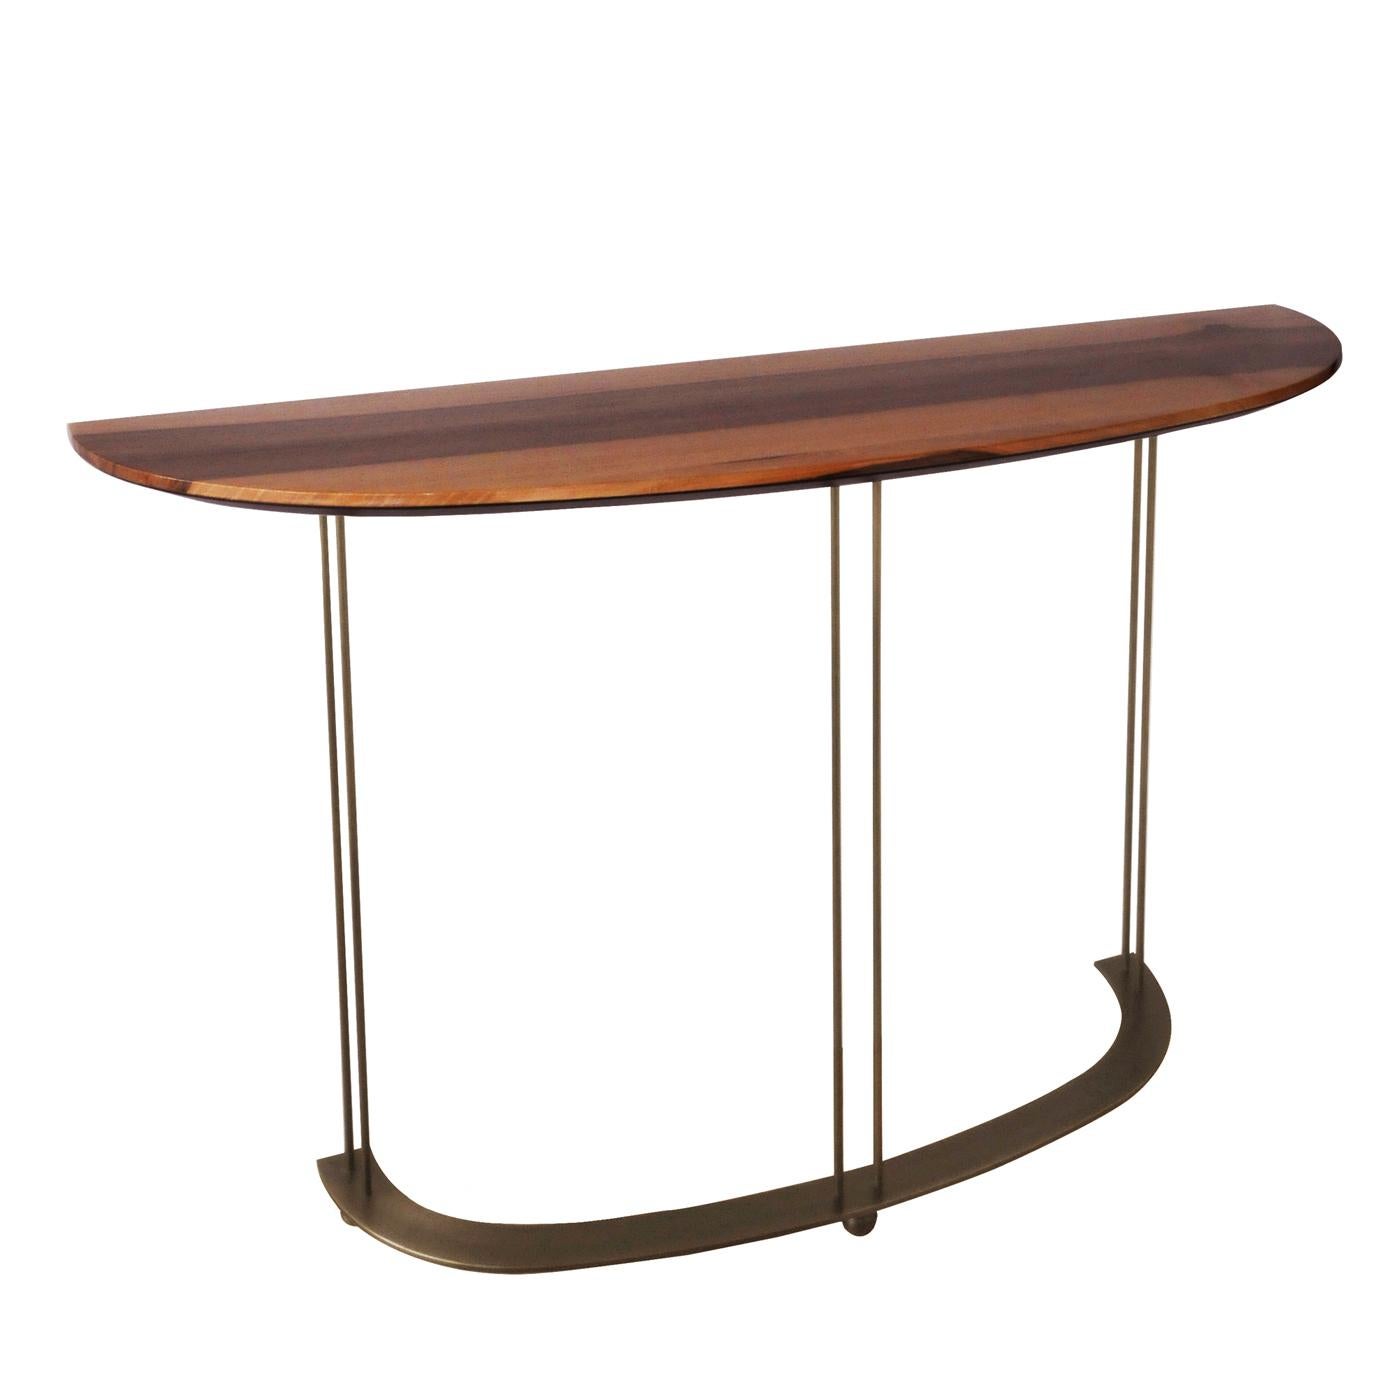 Evoking natural hues and textures, this console will be an elegant addition to an entryway, hallway or living room. Highly customizable in materials and finishes, this version features a demilune shaped top made of walnut Canaletto ebony and a